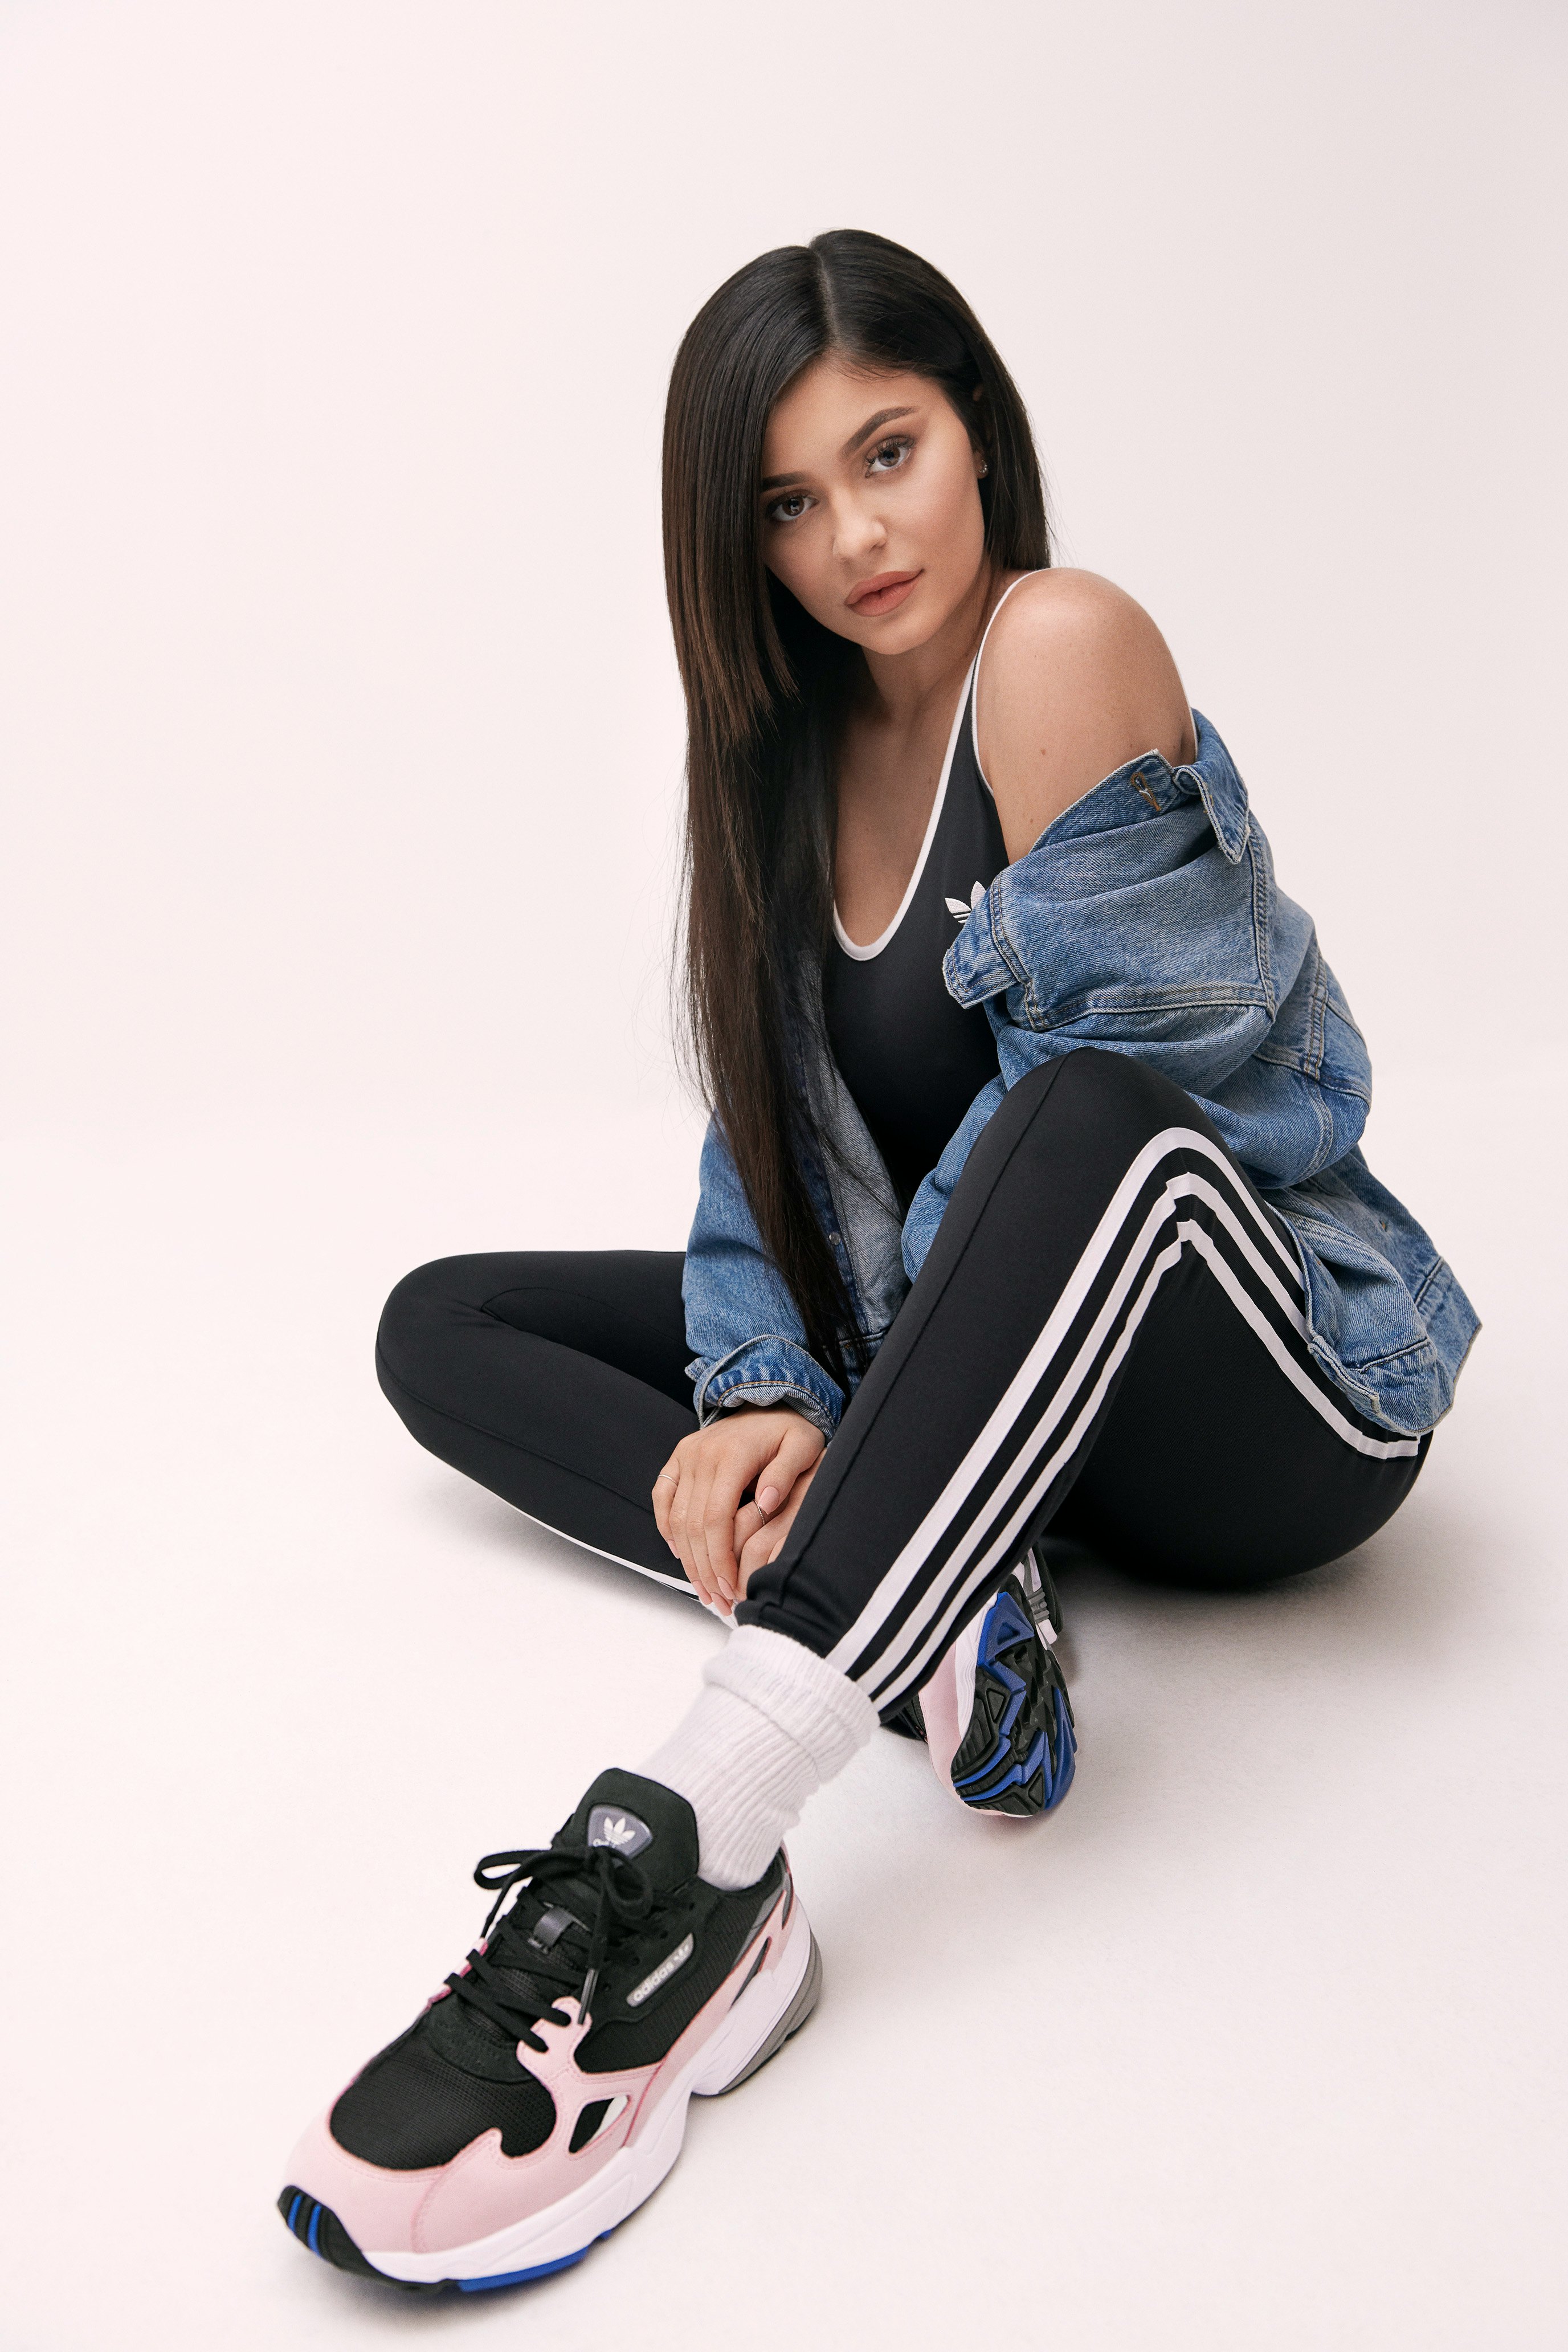 kylie jenner pink adidas